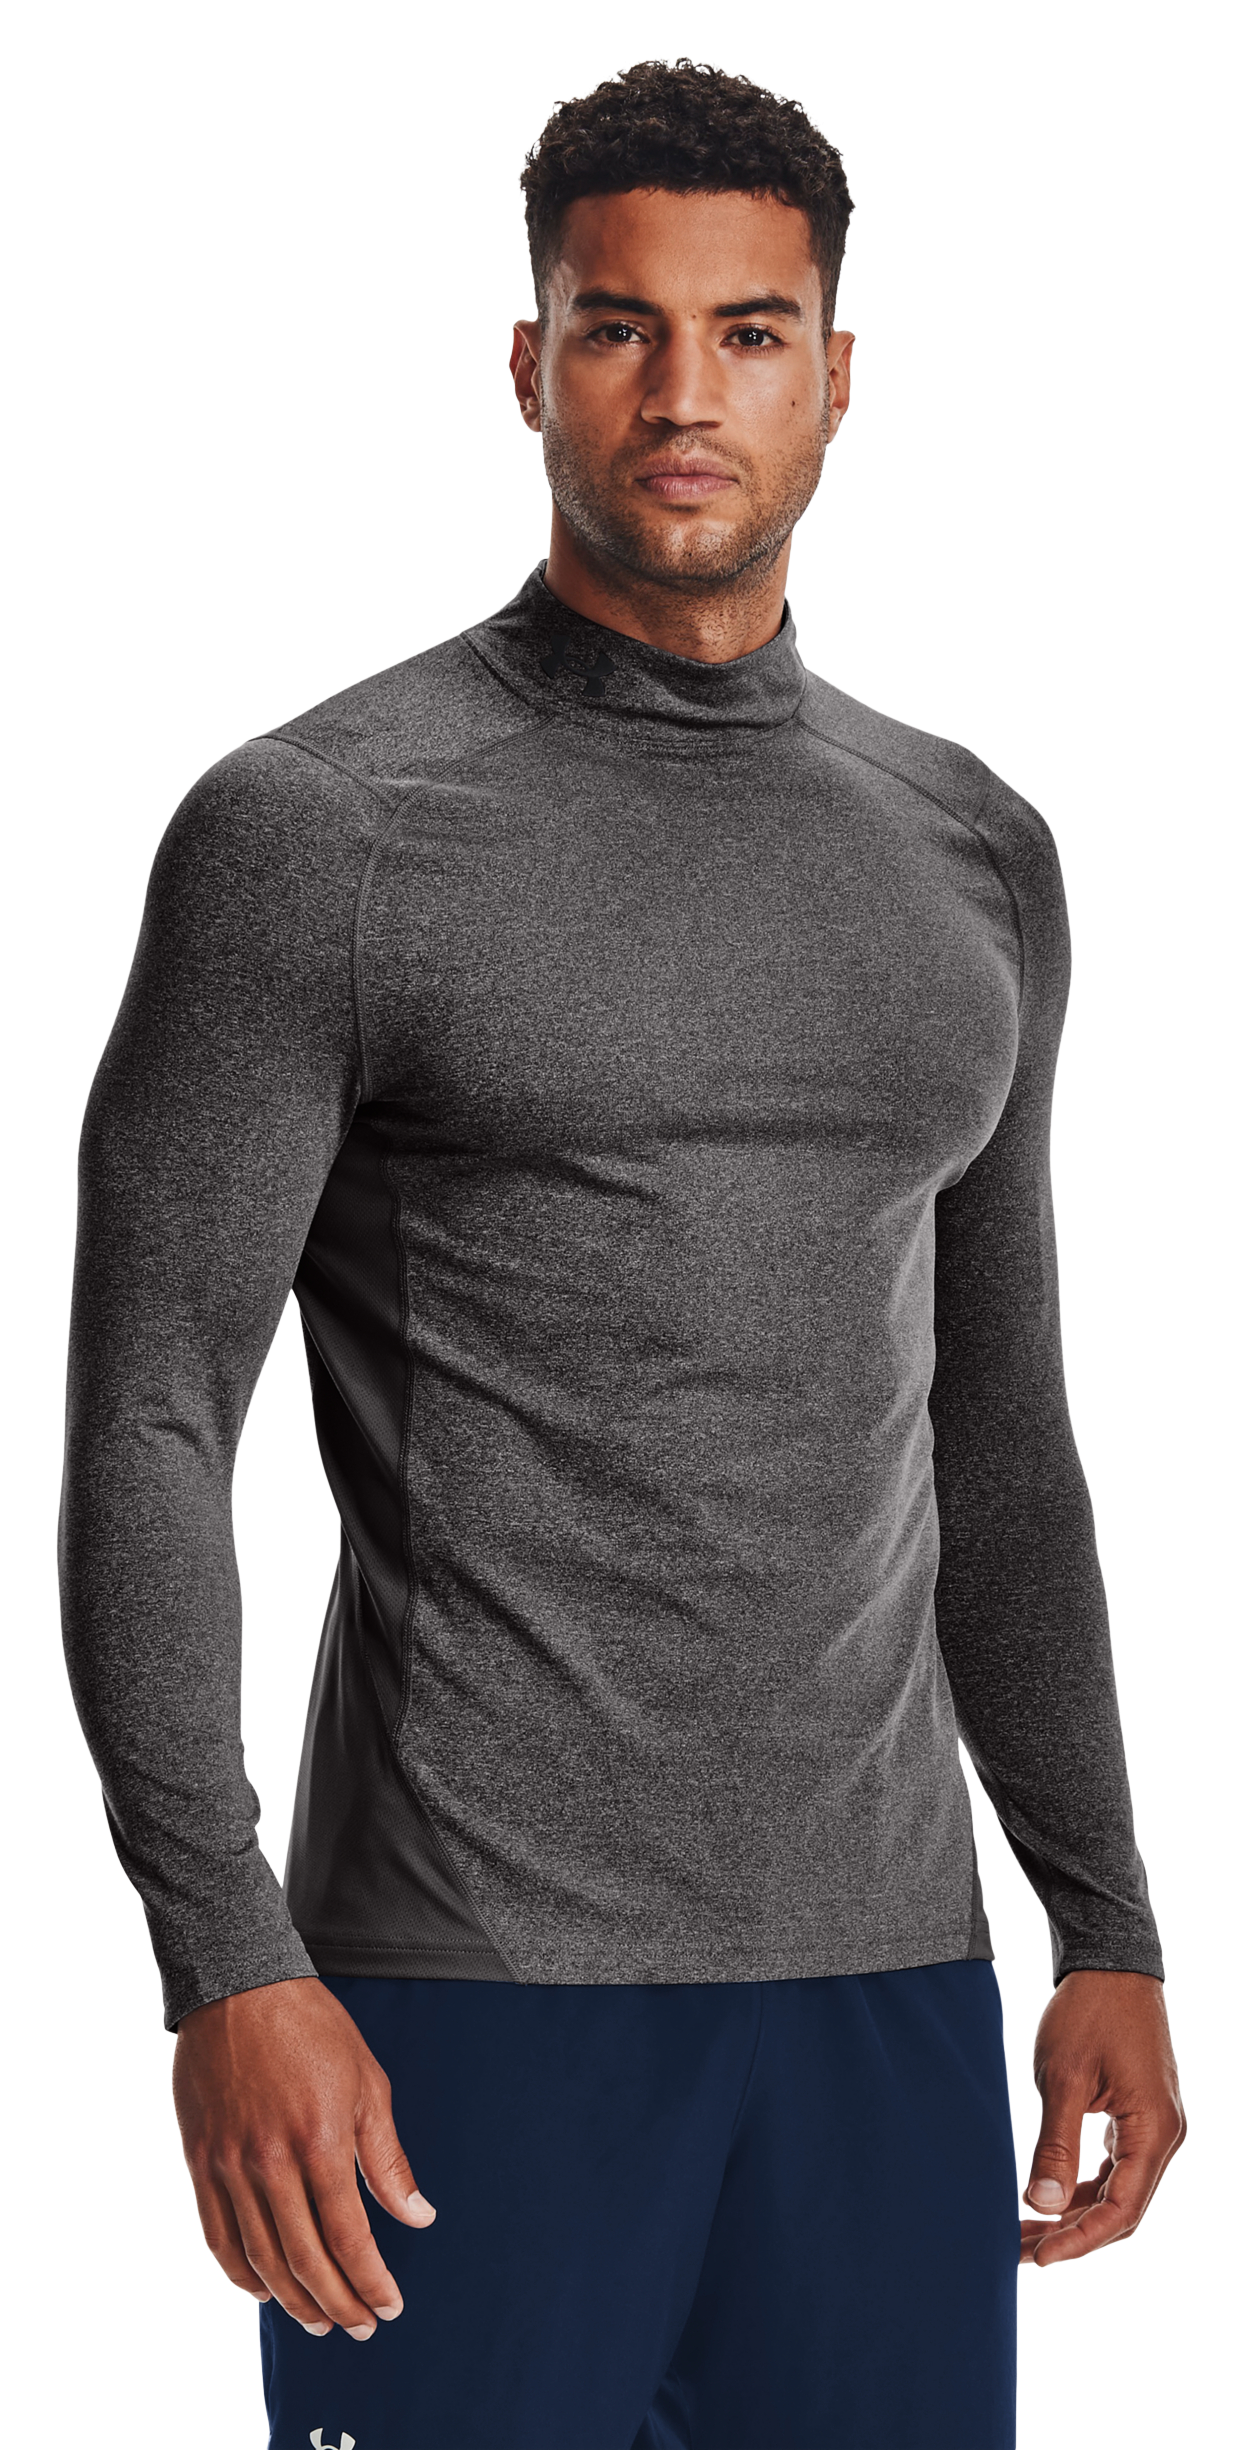 - for XL Long-Sleeve ColdGear Cabela\'s Mock Men Heather/Black - Armour Under Fitted Light Charcoal |